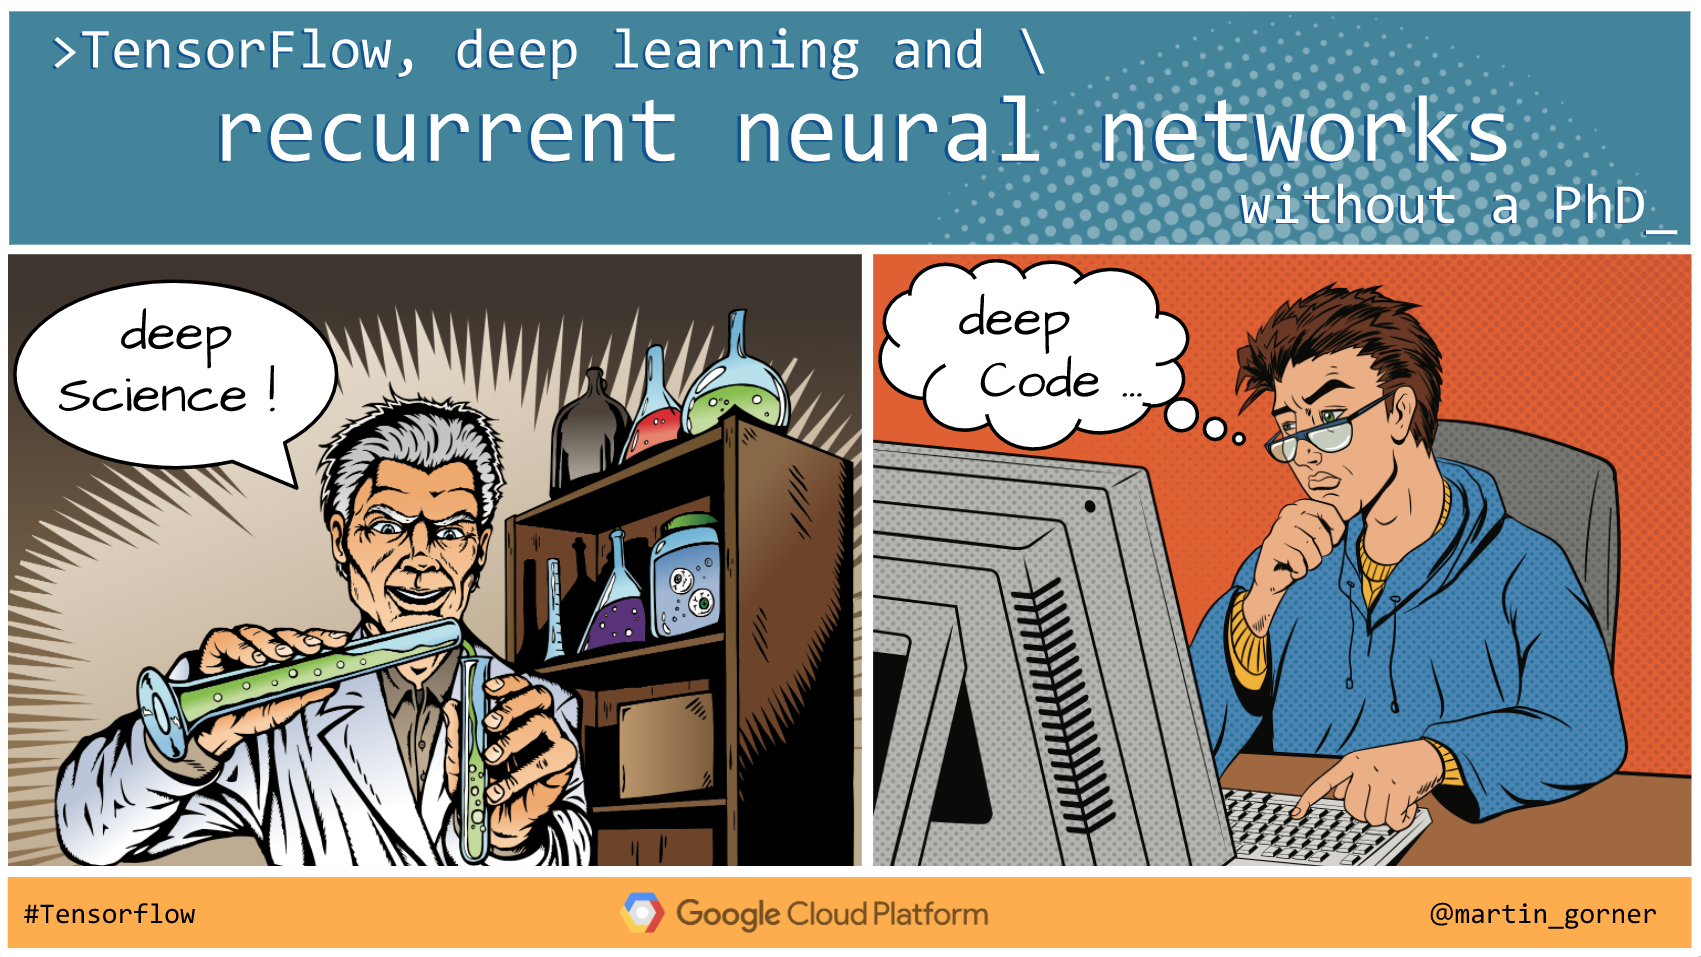 TensorFlow, deep learning and recurrent neural networks